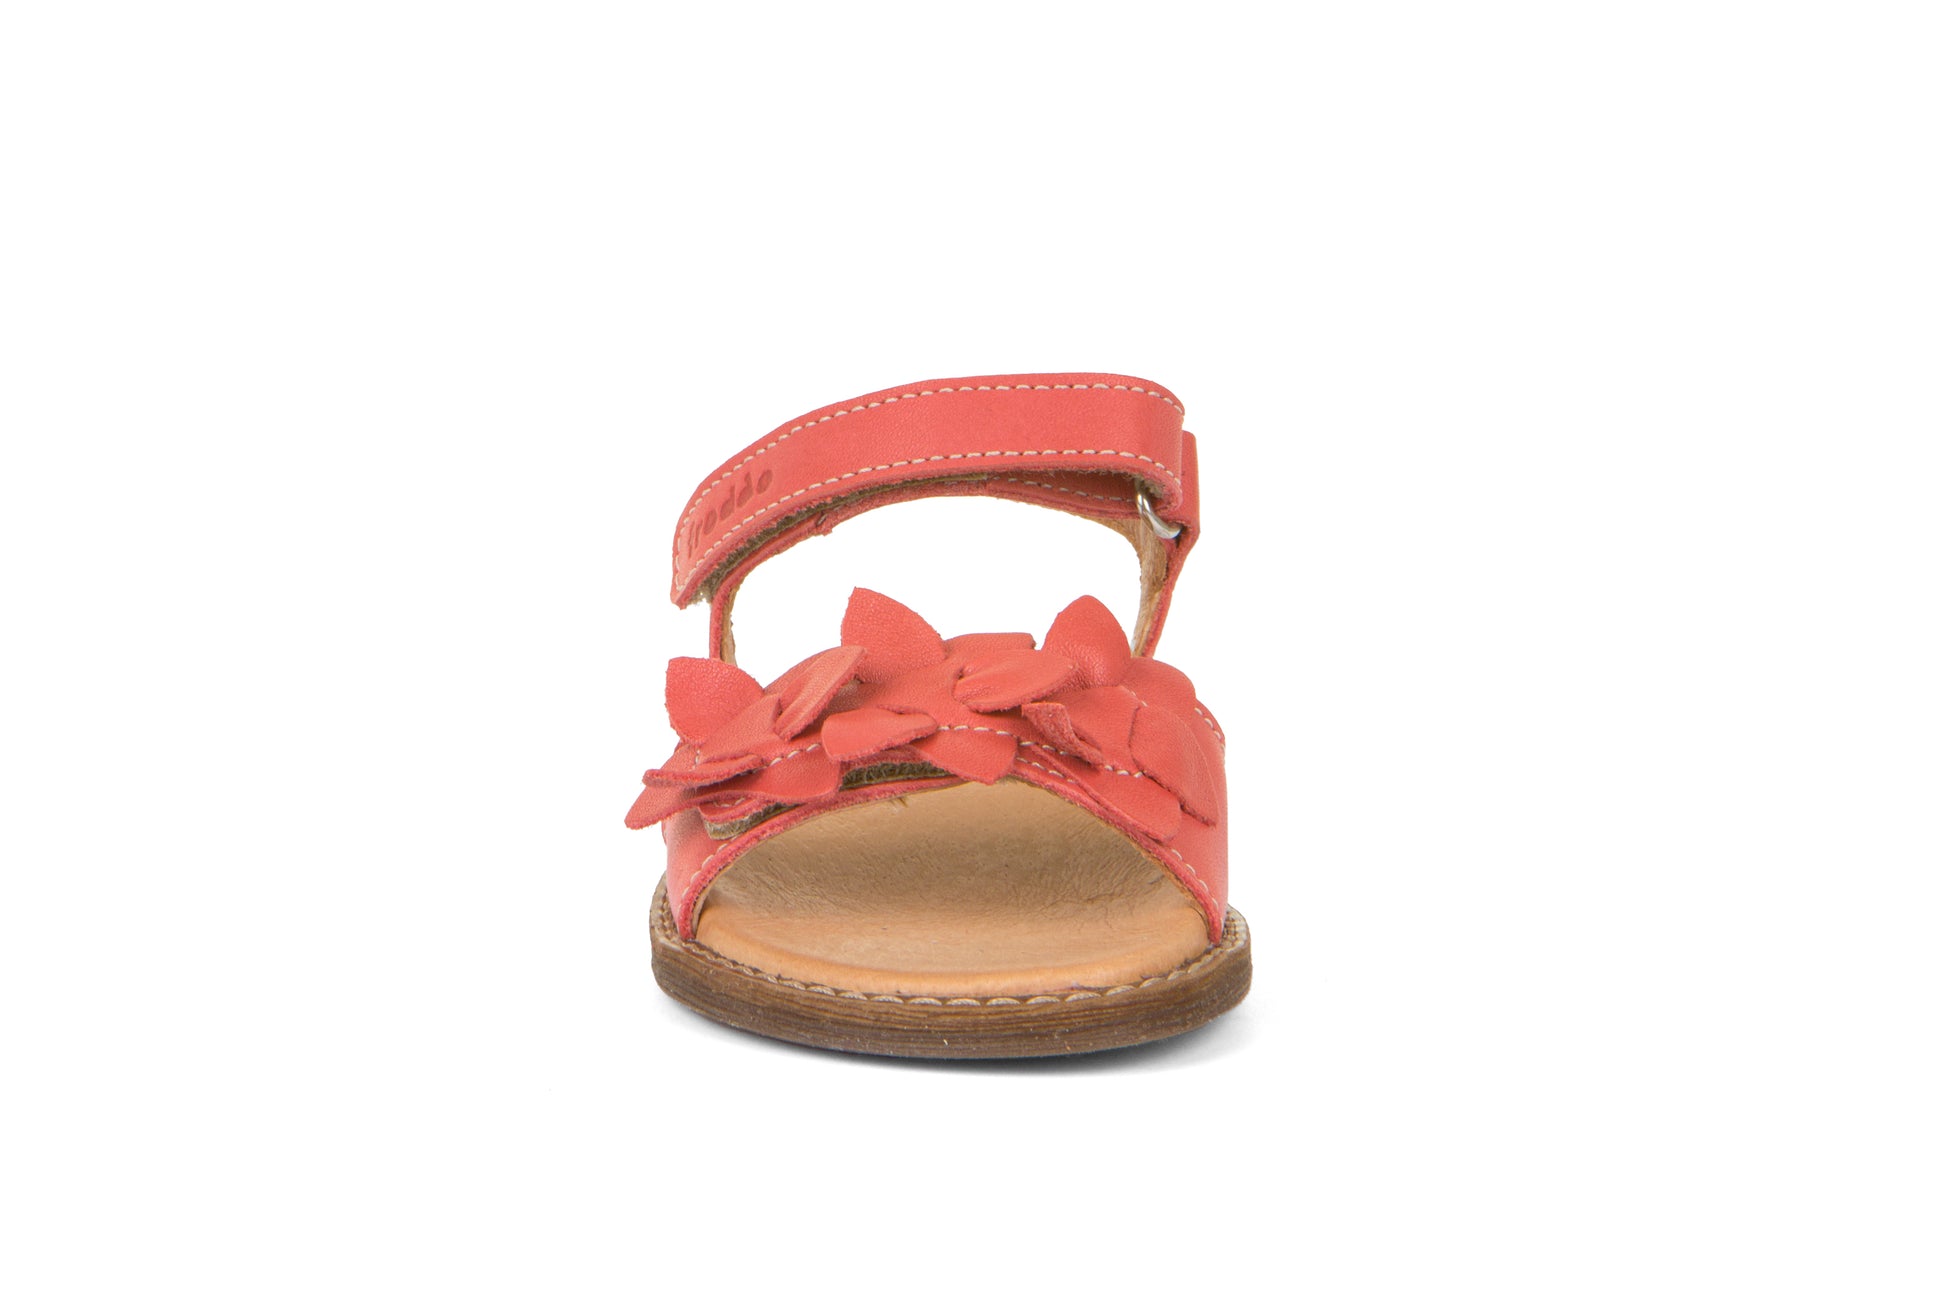 A girls sandal by Froddo, style G3150228-9 Lore Flowers, in coral with flowers detail, velcro fastening. Front view.